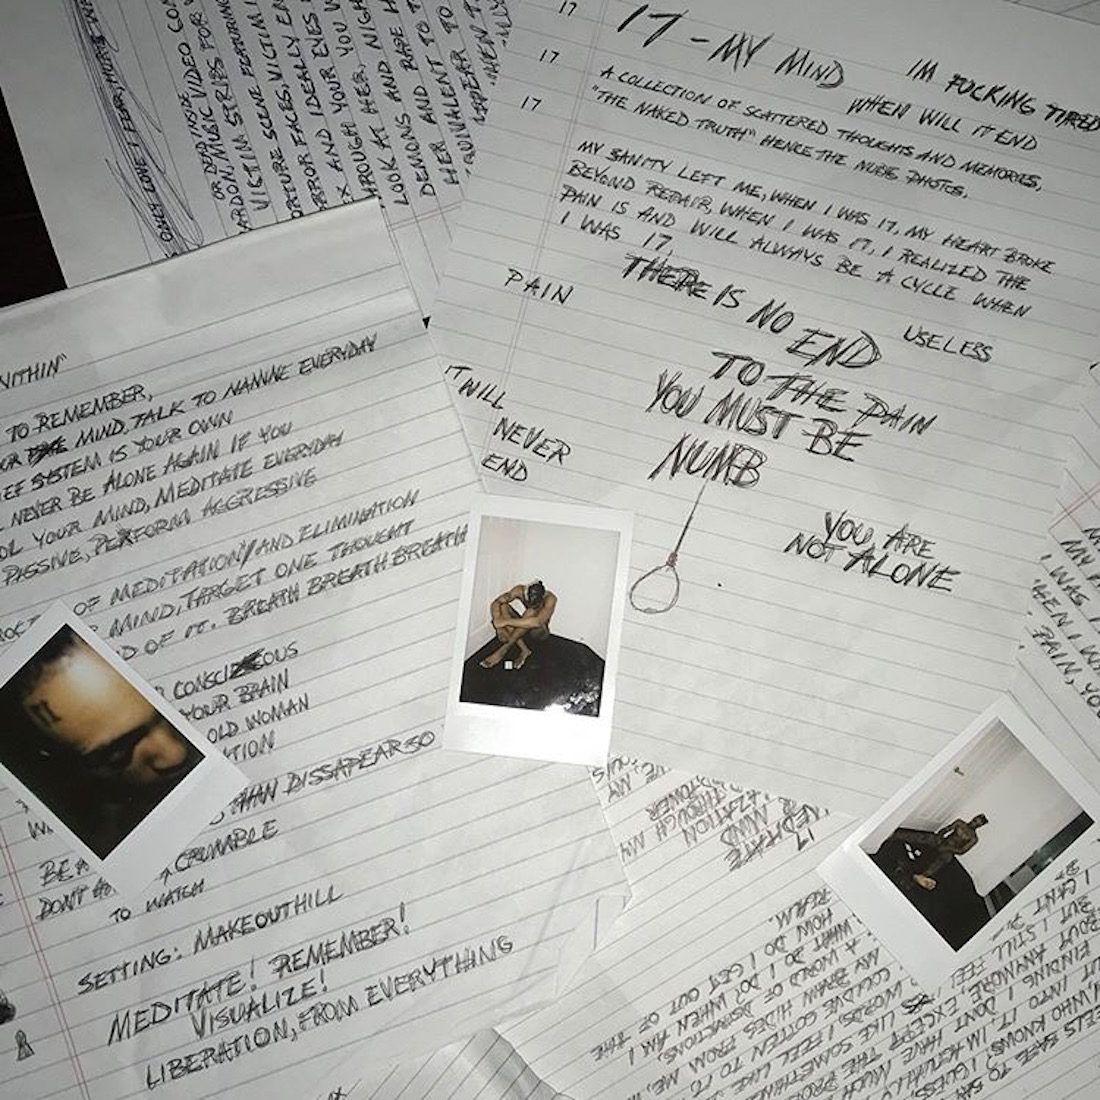 XXXTentacion Includes Nude Photo in Intense Artwork for '17'. Mass